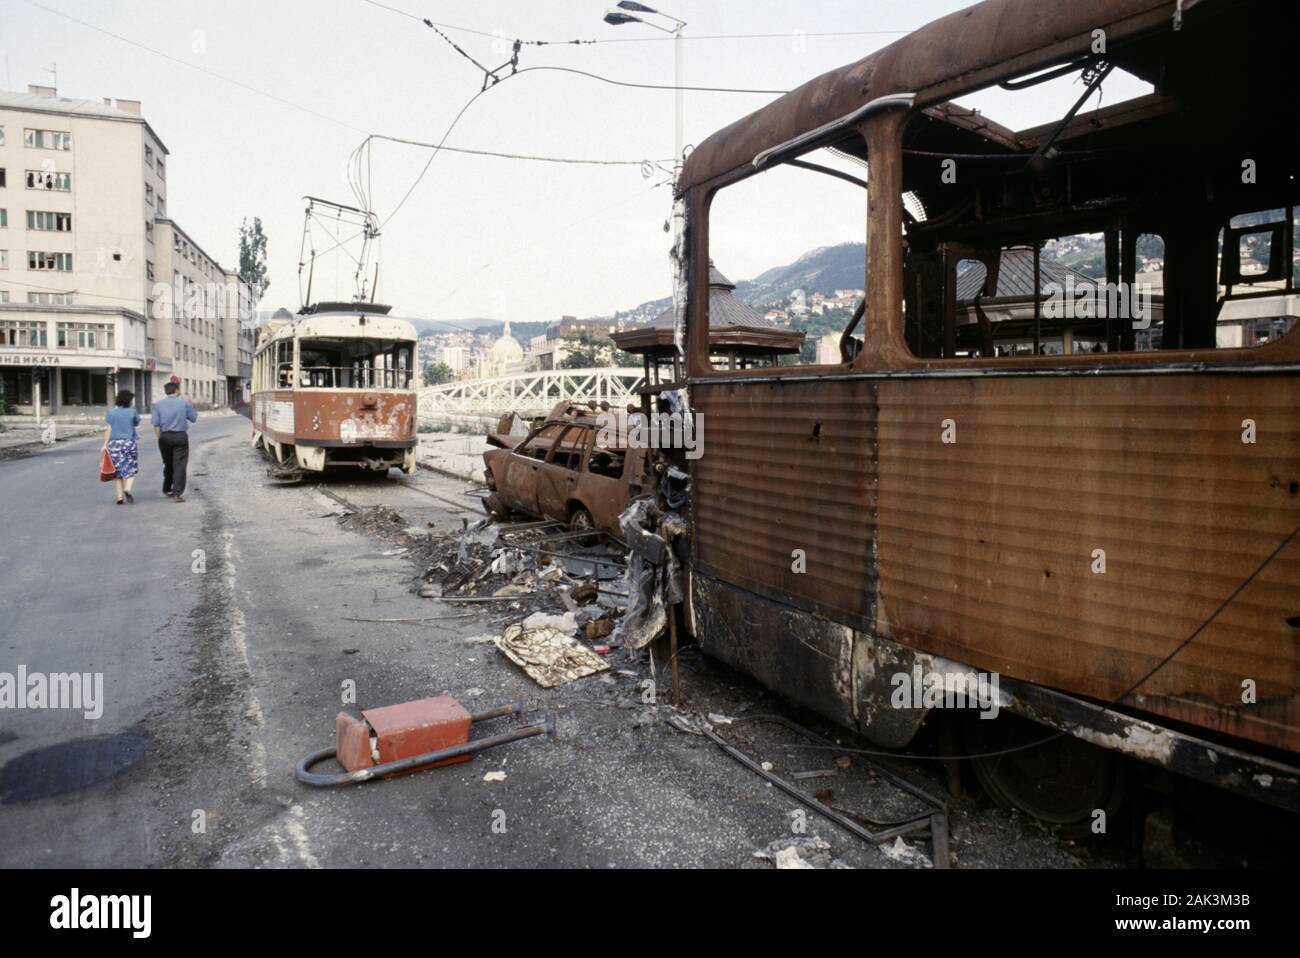 17th August 1993 During the Siege of Sarajevo:a couple walk past wrecked trams along Obala Kulina Bana during one of the frequent, though brief, ceasfires. Stock Photo